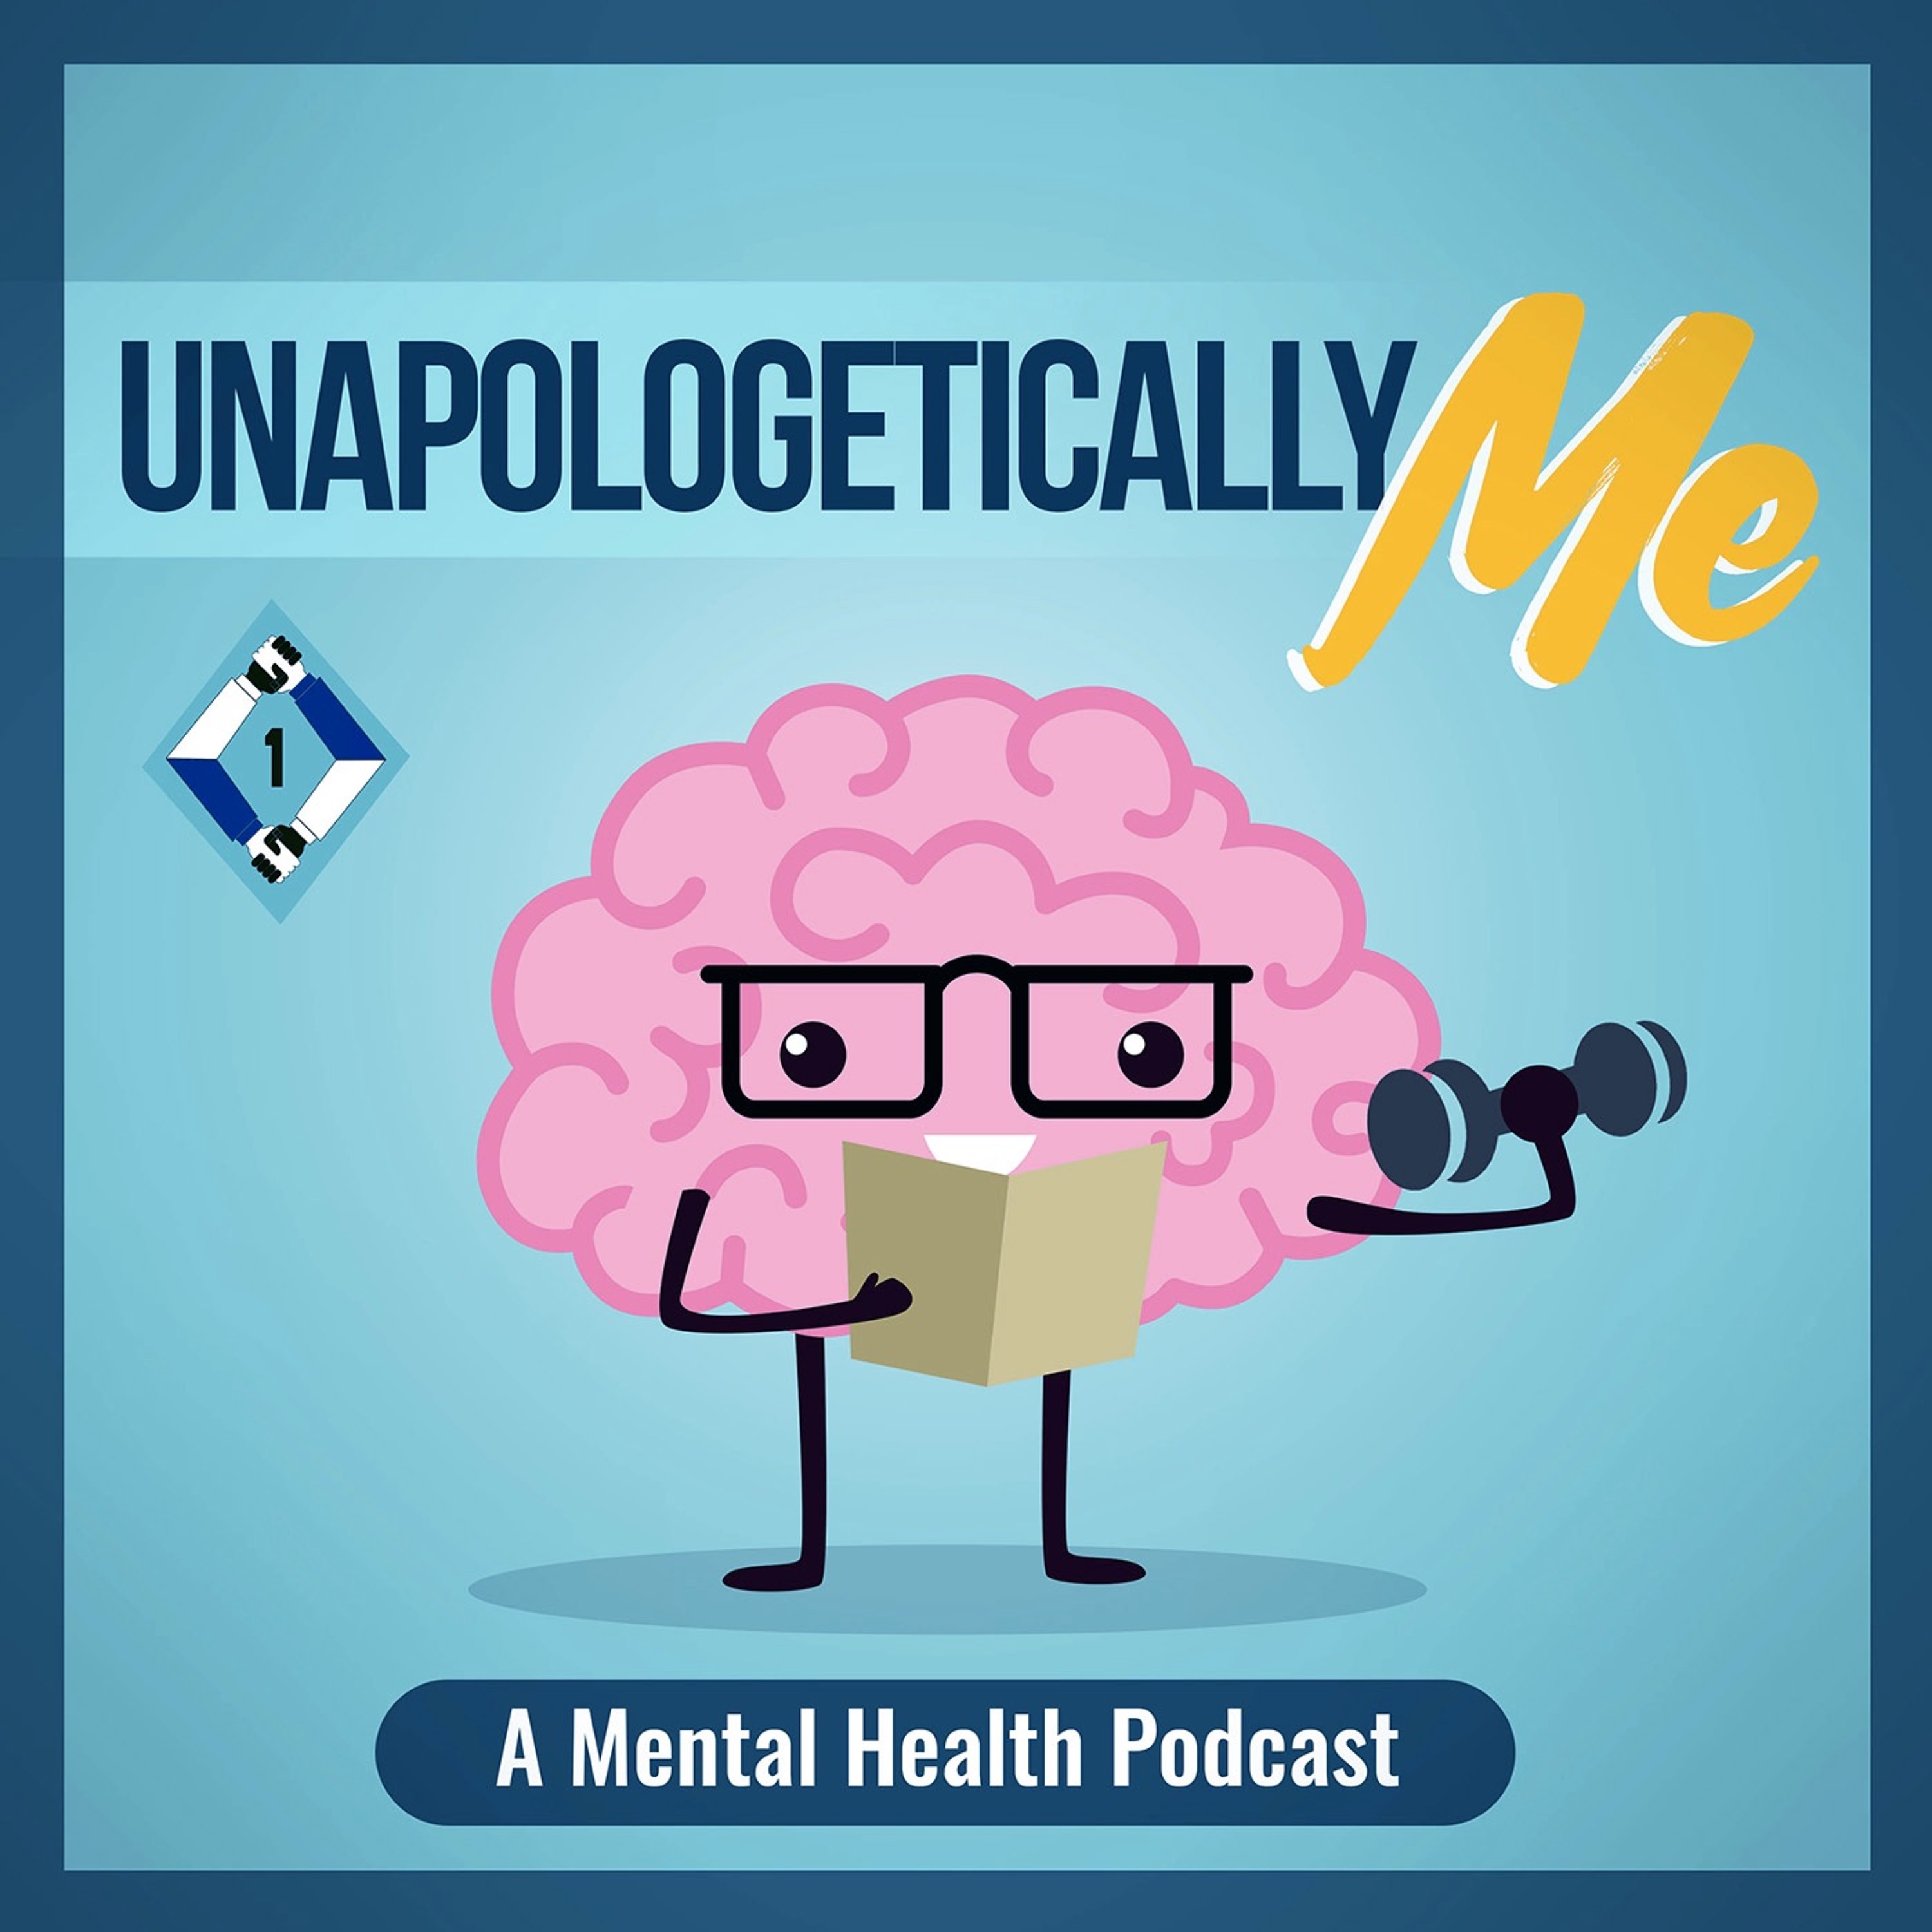 Unapologetically Me: A Mental Health Podcast - Health Tips Comp #3